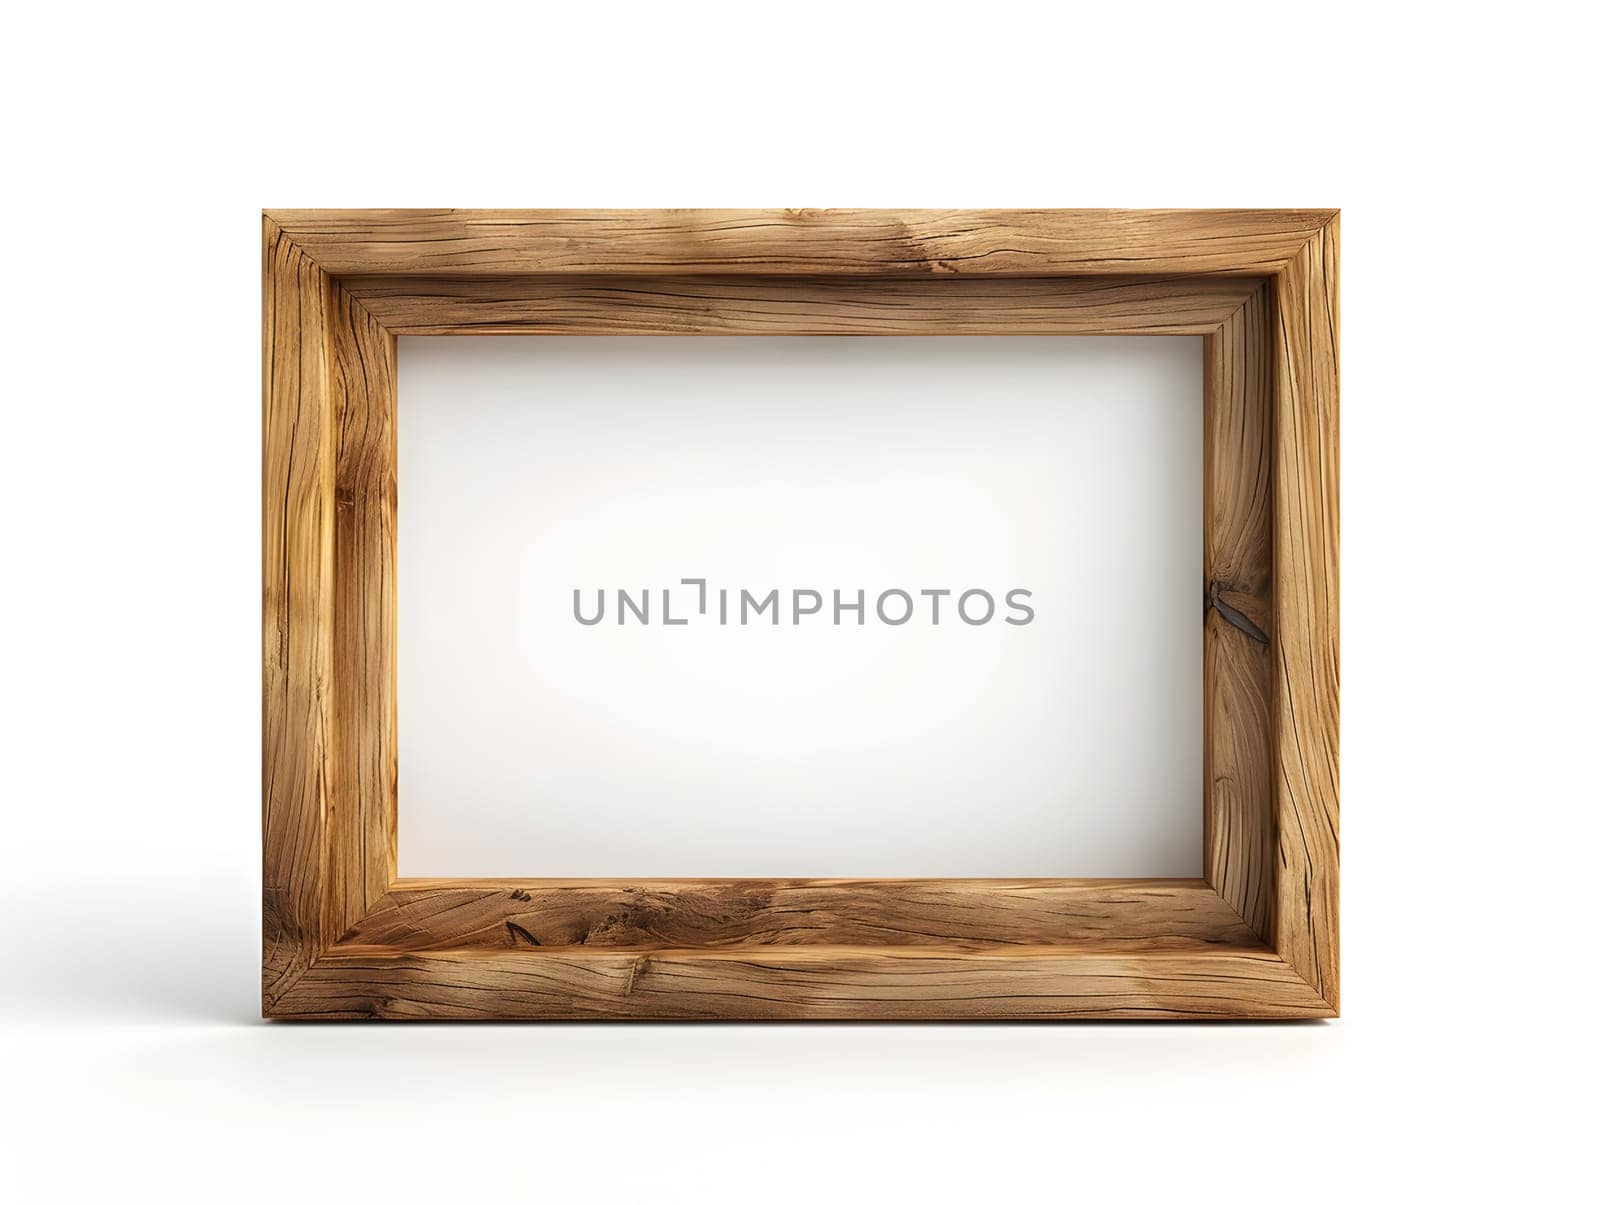 Brown hardwood picture frame in rectangle shape for displaying art by Nadtochiy